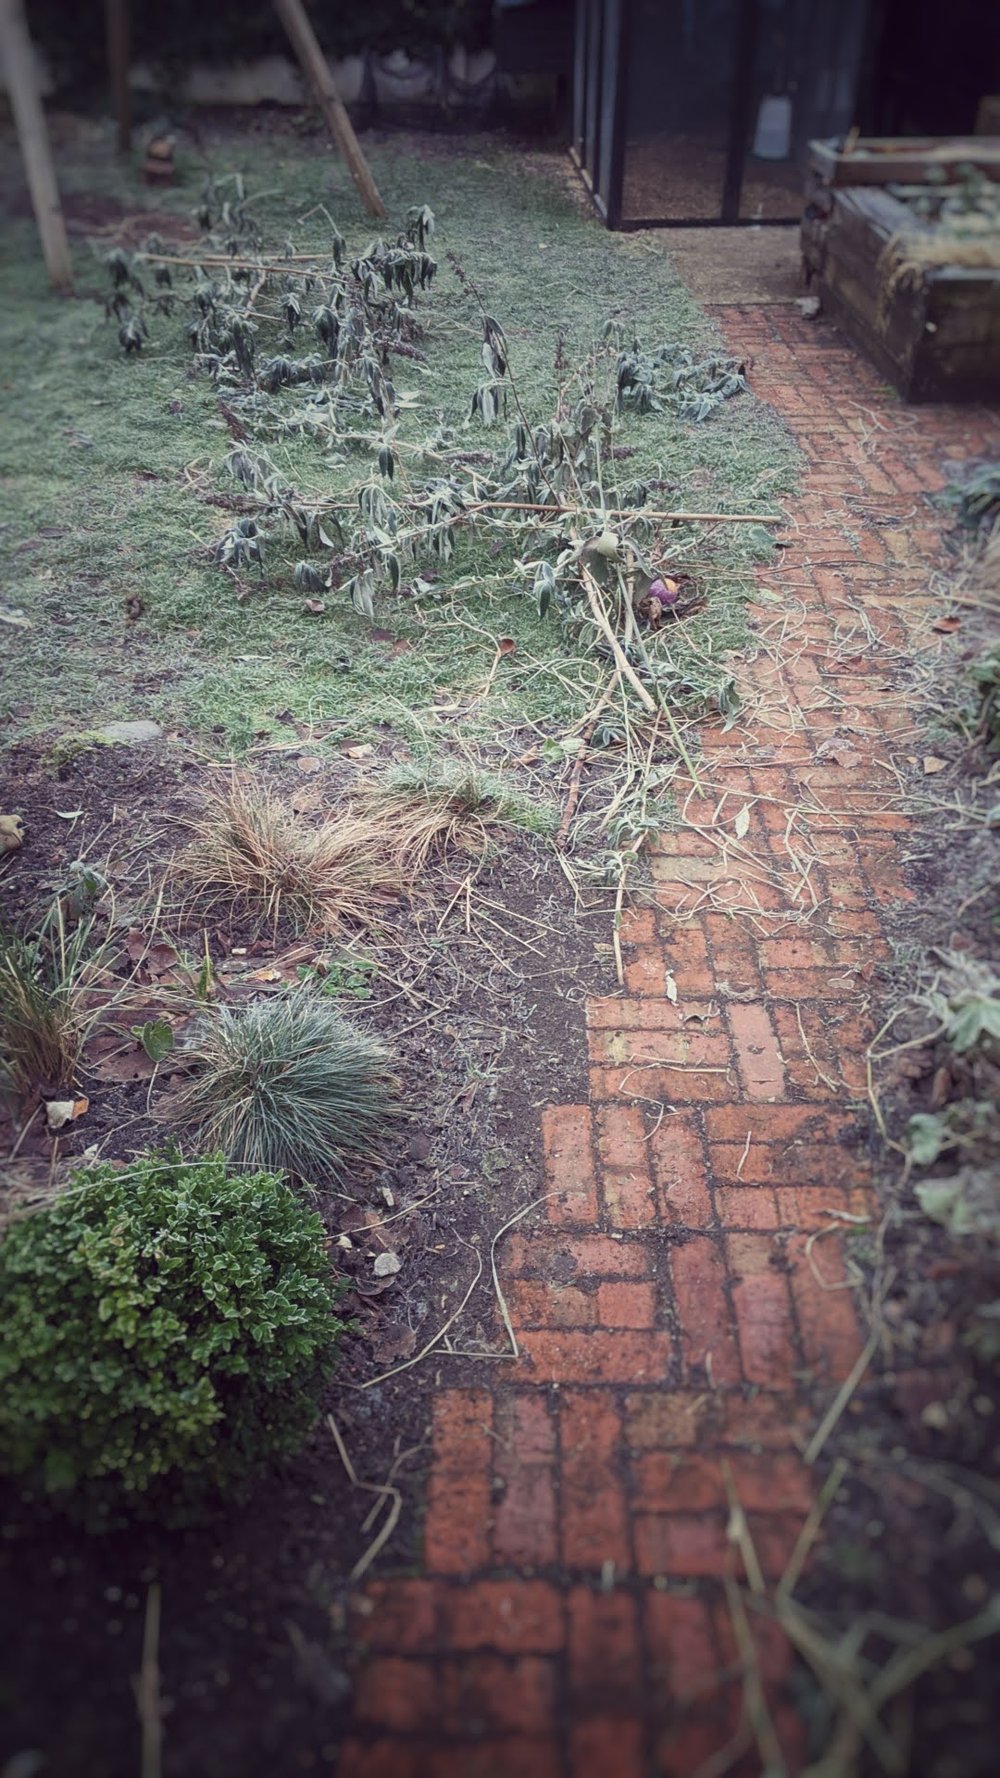 The bricks from our conservatory repurposed for the garden path